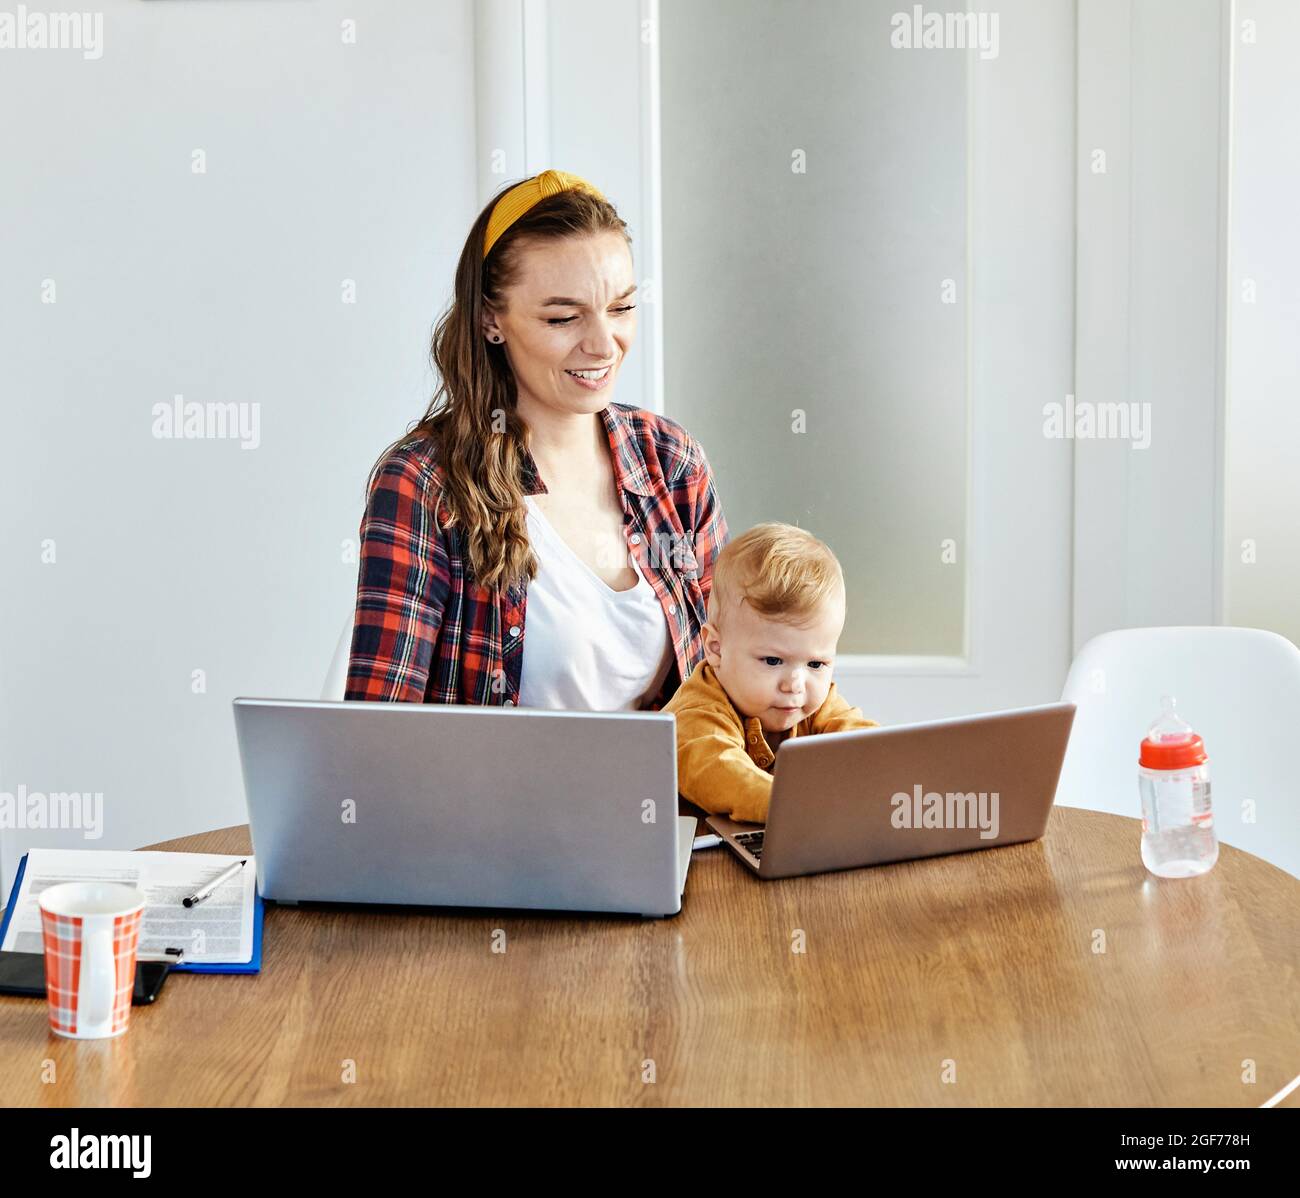 mother baby laptop computer child woman working business parent mom family Stock Photo